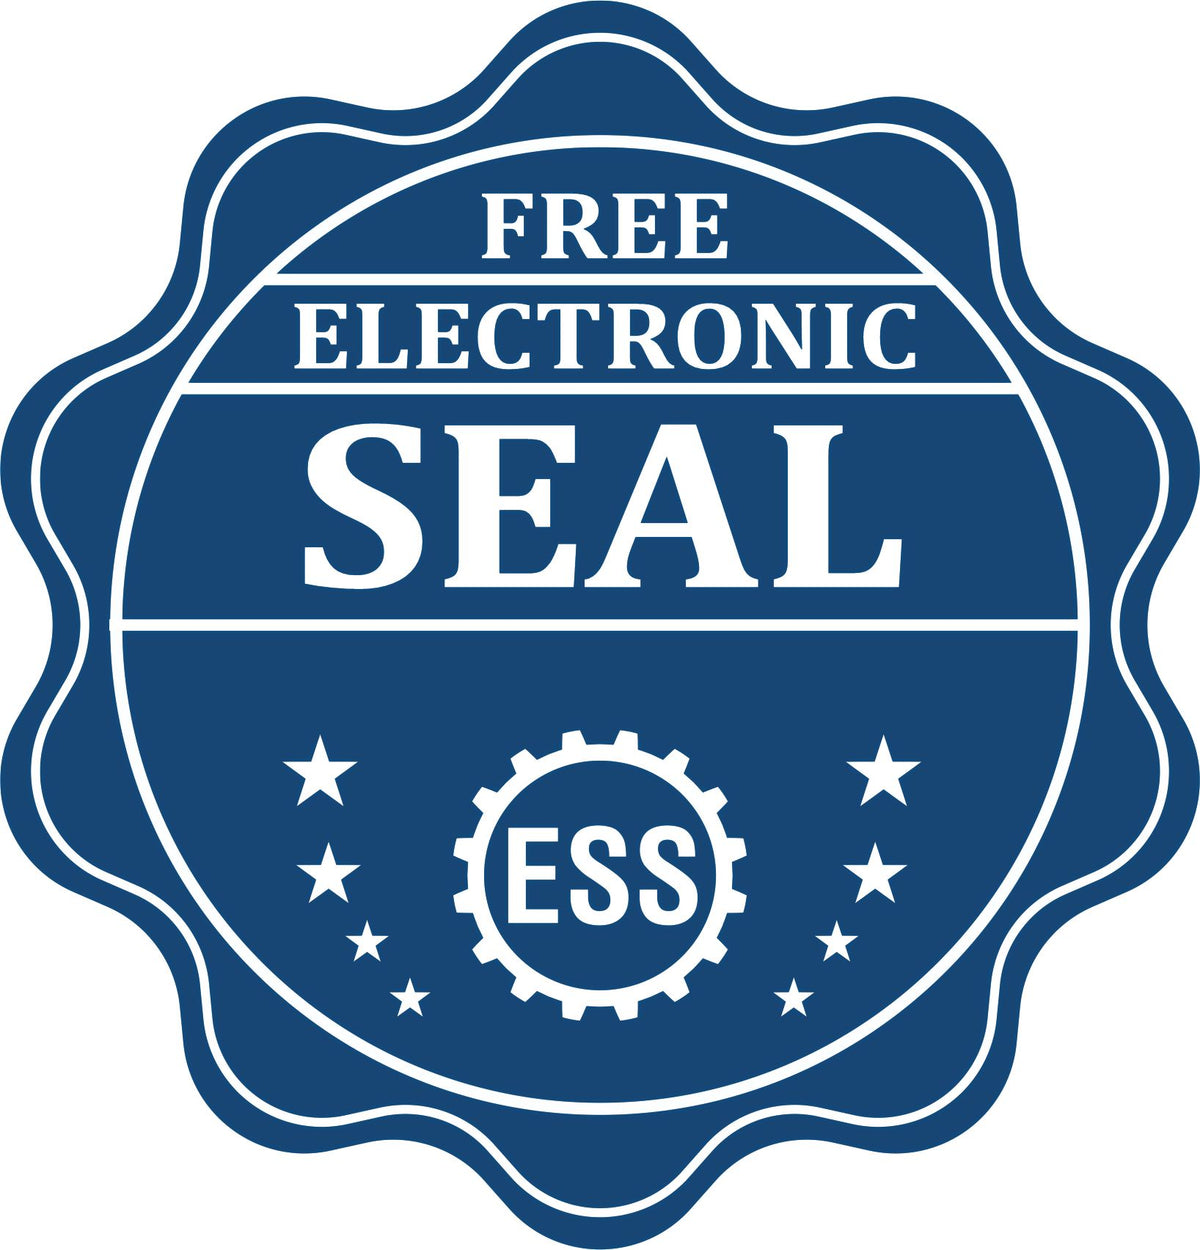 A badge showing a free electronic seal for the Premium MaxLight Pre-Inked Wyoming Geology Stamp with stars and the ESS gear on the emblem.